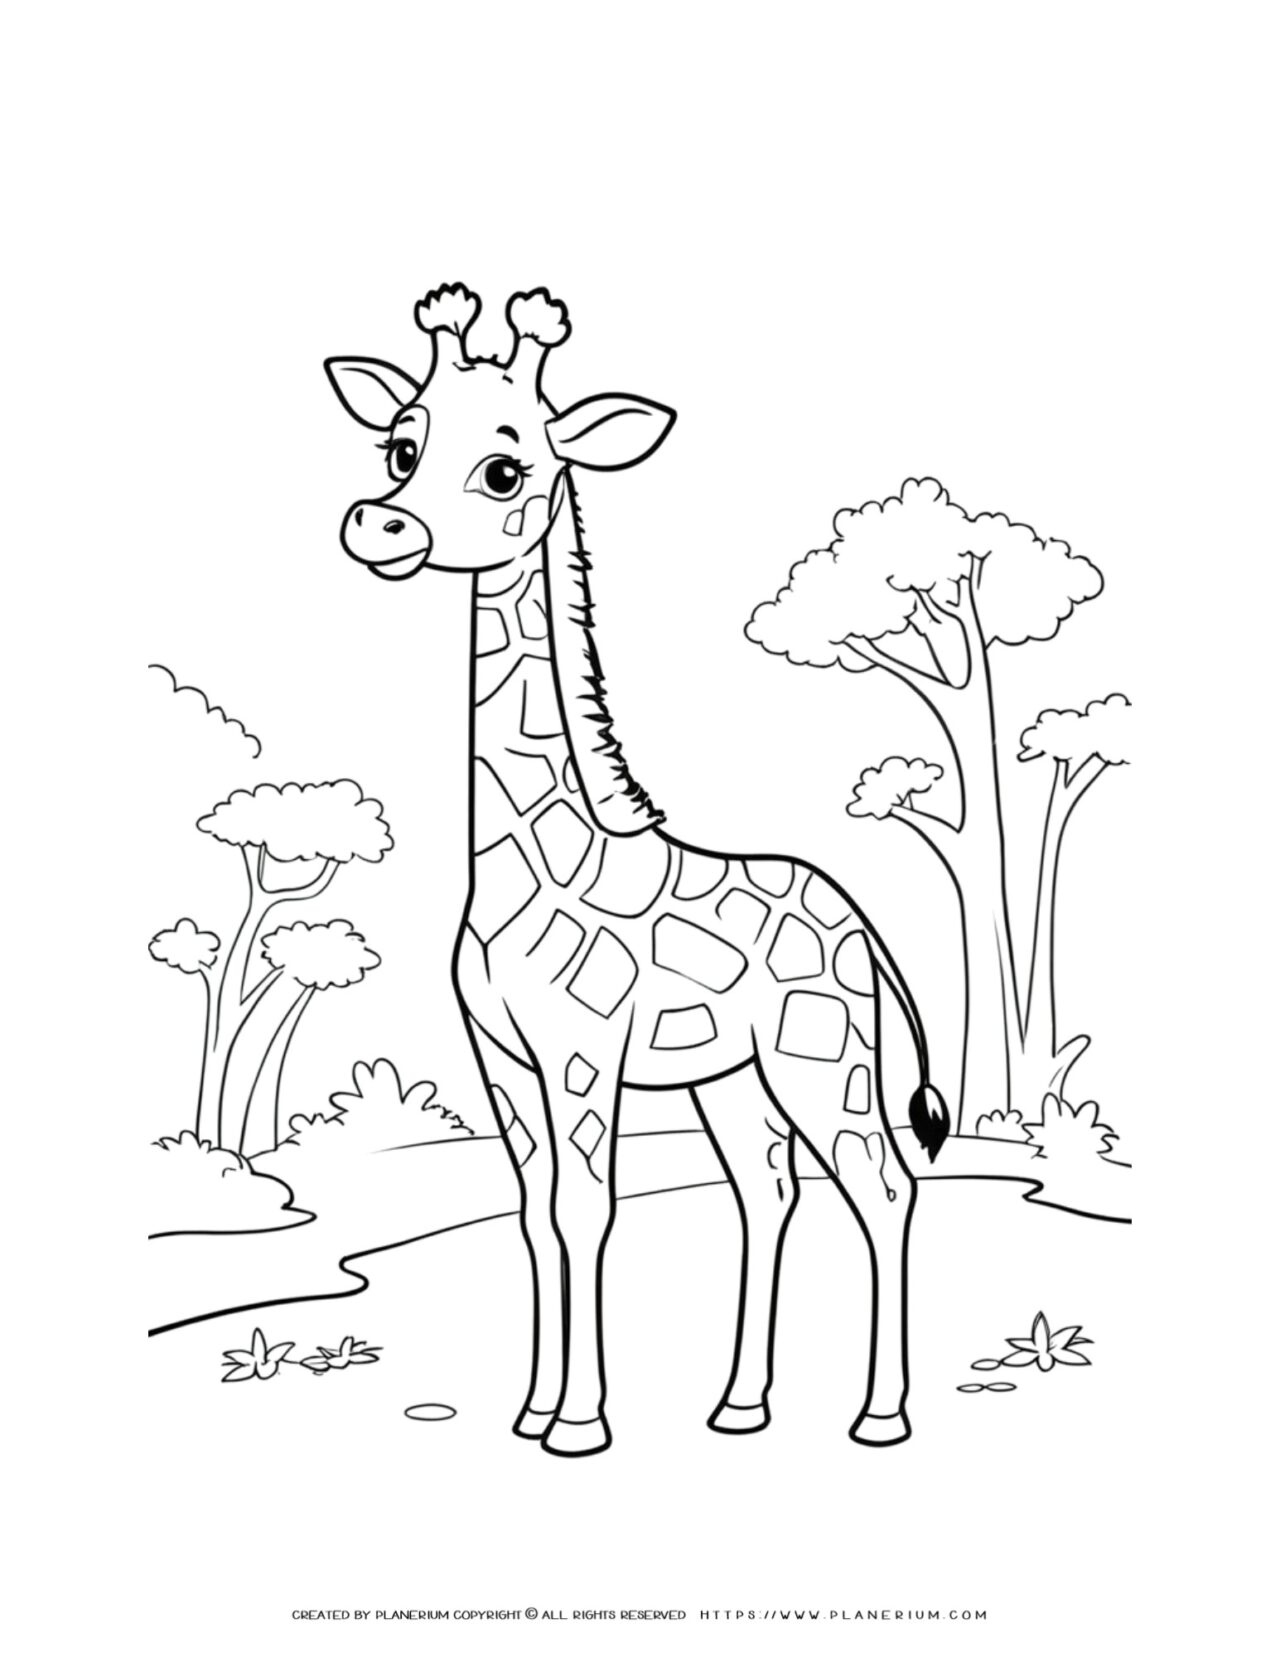 giraffe-in-africa-animal-coloring-page-for-kids